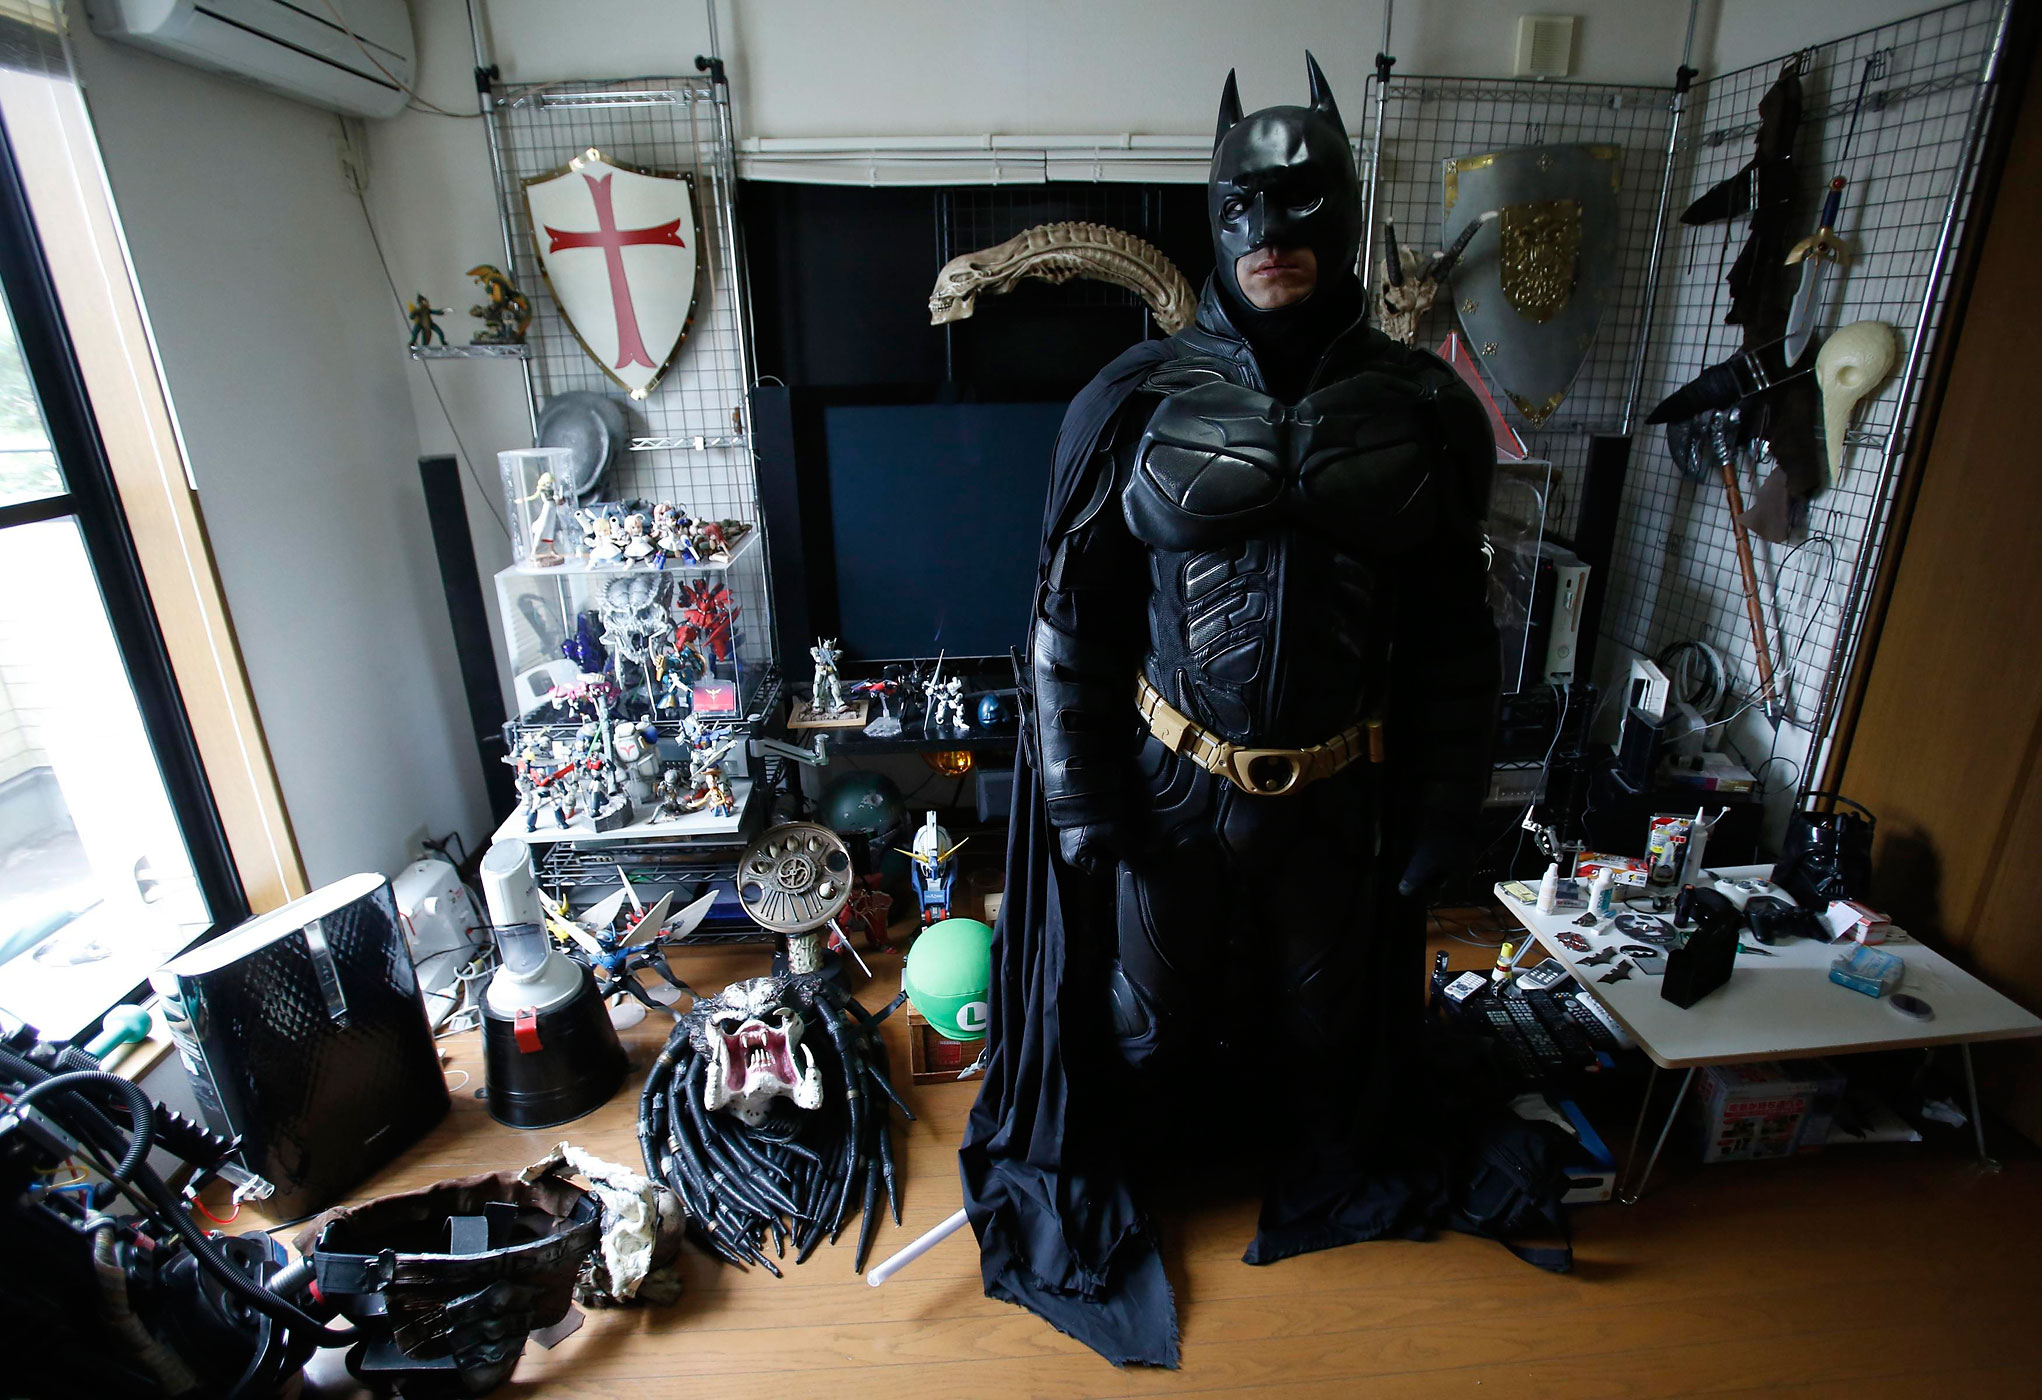 A 41-year-old man going by the name of Chibatman poses in his room before going on the road on his "Chibatpod" in Chiba, east of Tokyo